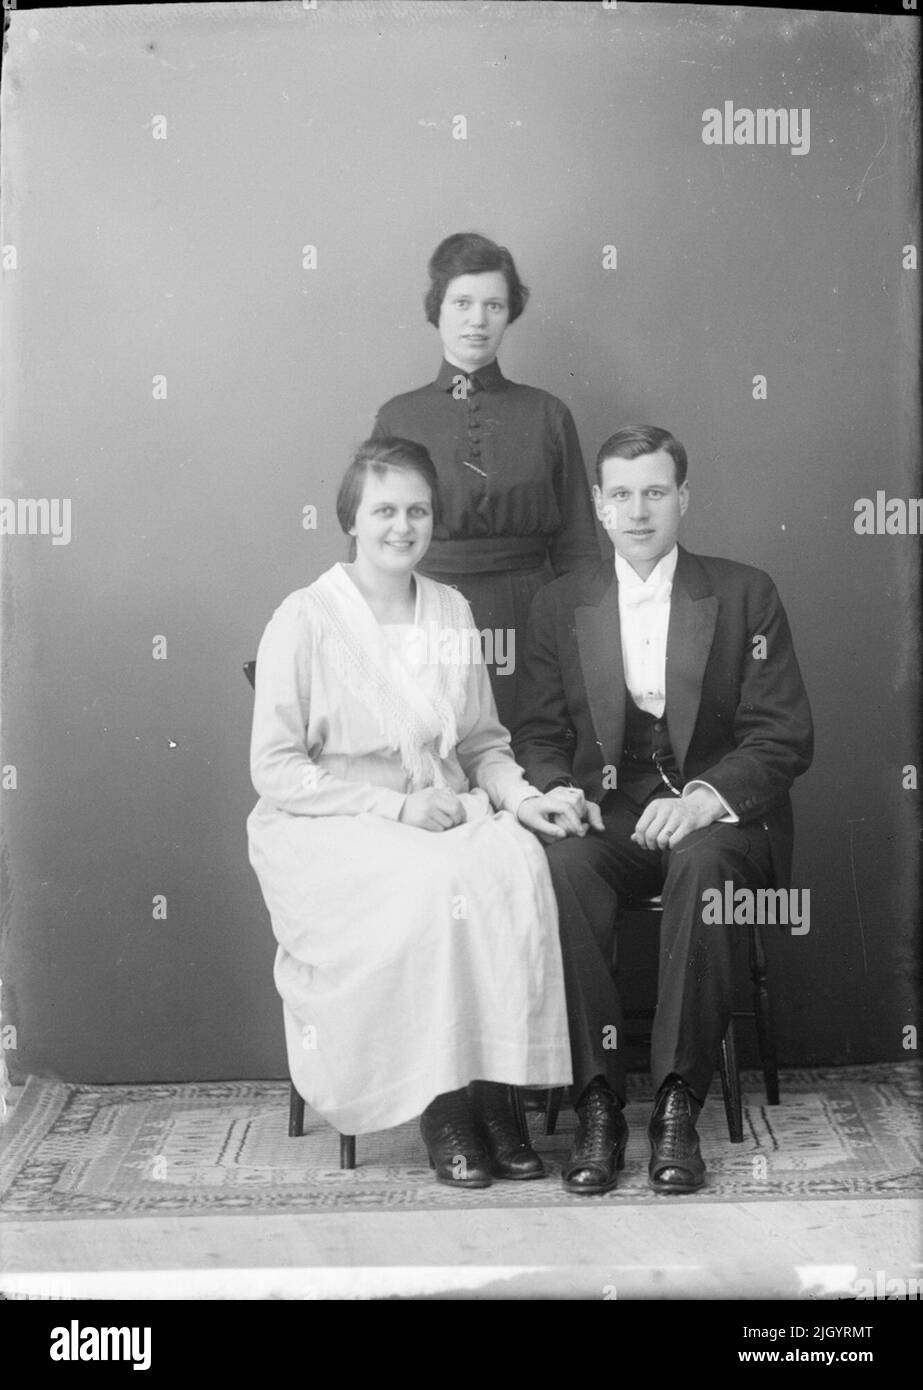 Group portrait - two women and one man, Östhammar, Uppland. Historical event, name related to Objek: Eriksson, Elov Stock Photo